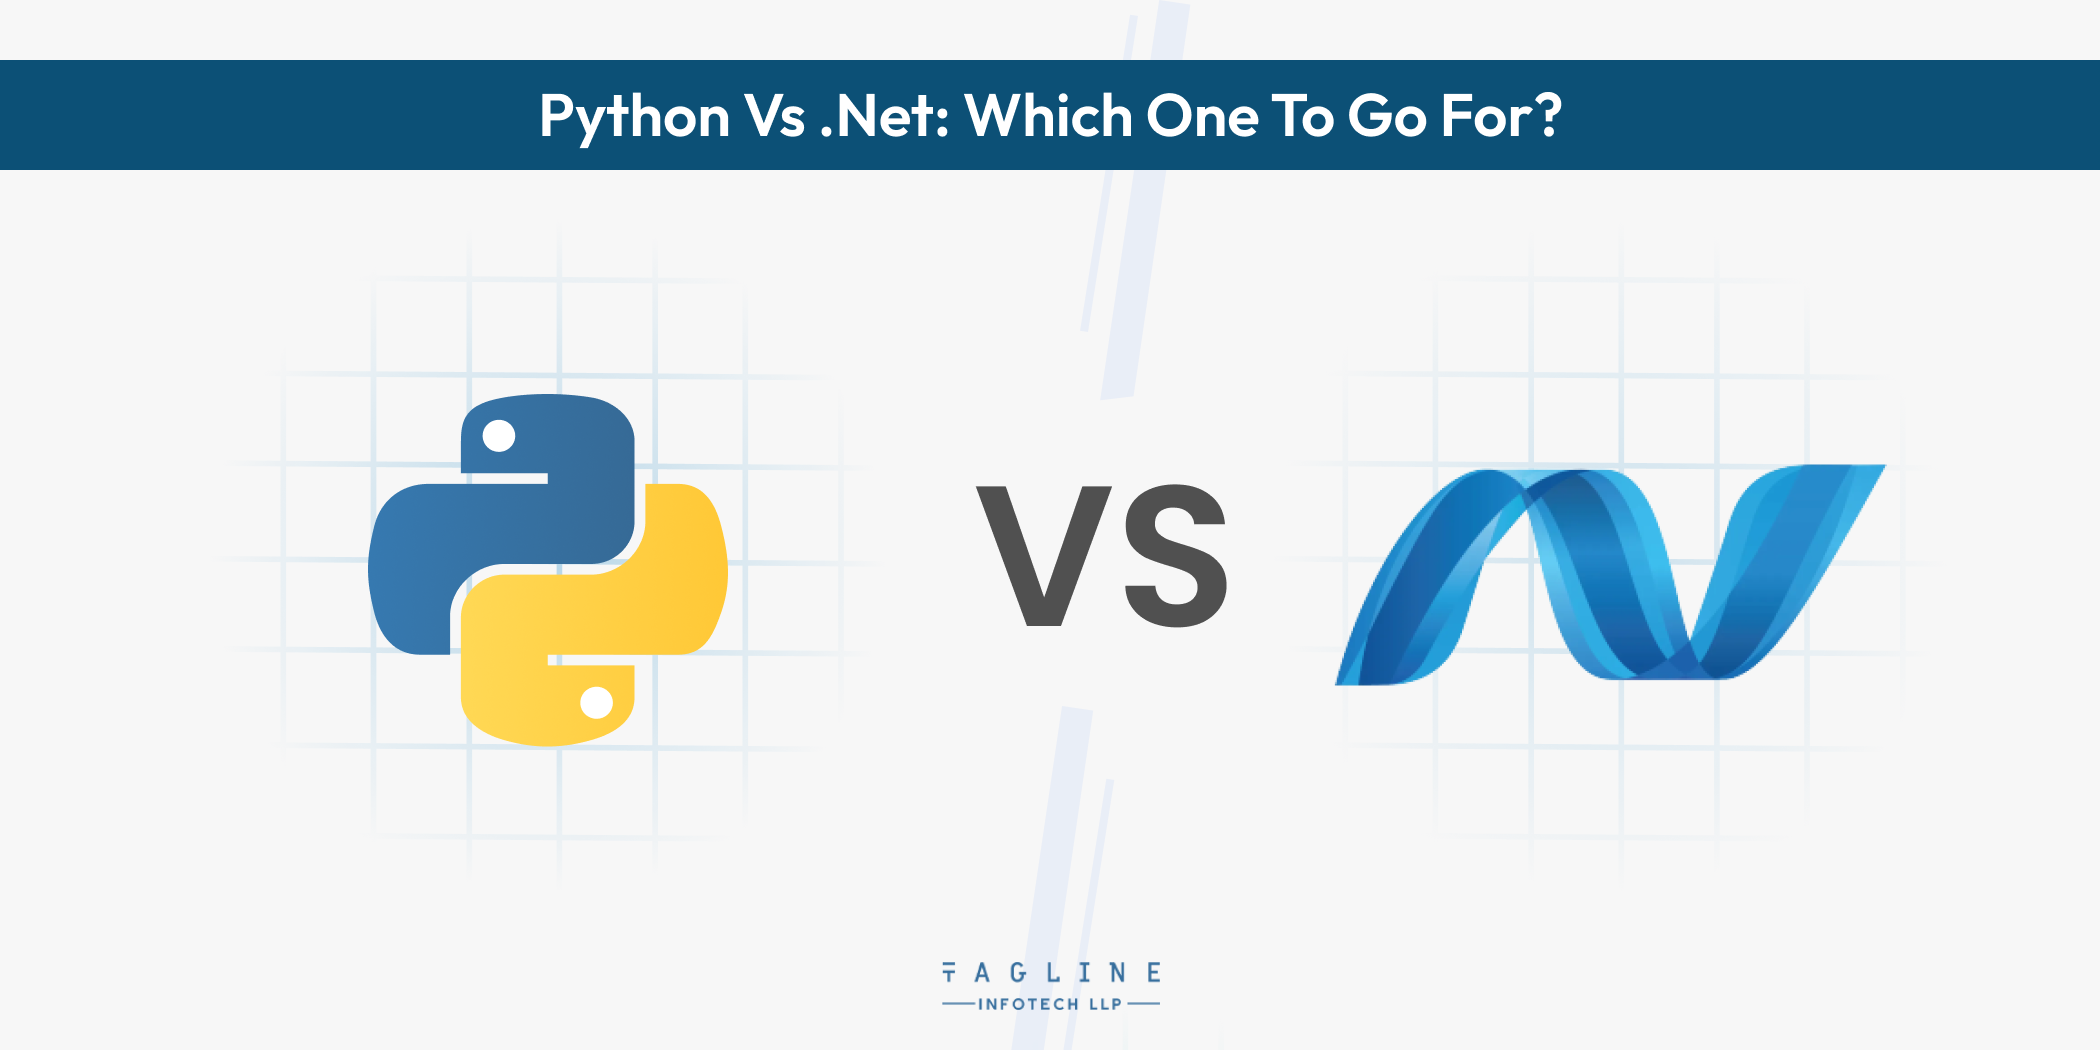 Python vs .NET: Which one to go for?